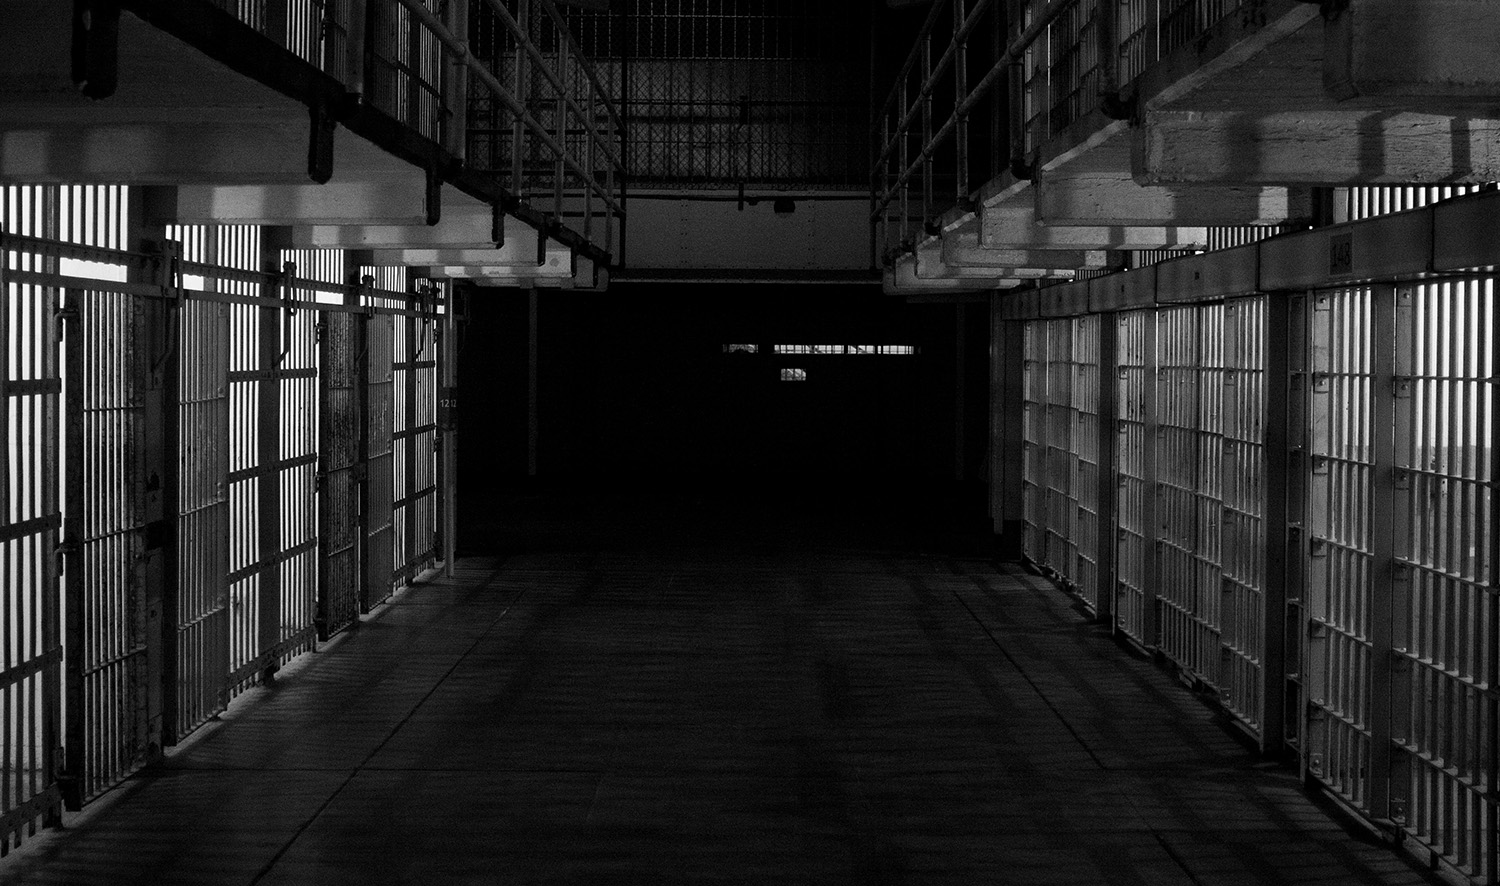 A black and white image of prison cells